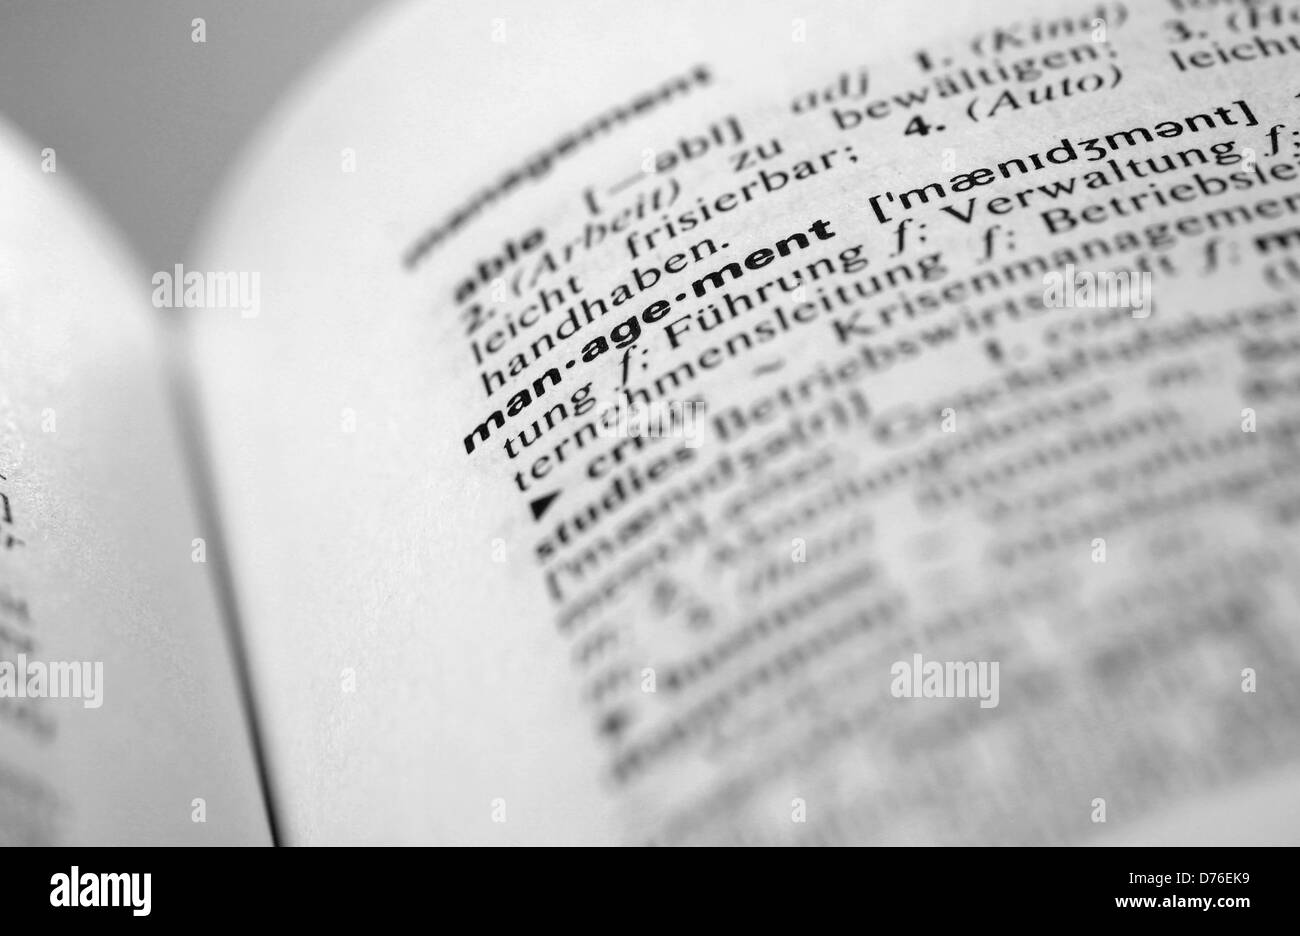 Management definition in English German dictionary Stock Photo